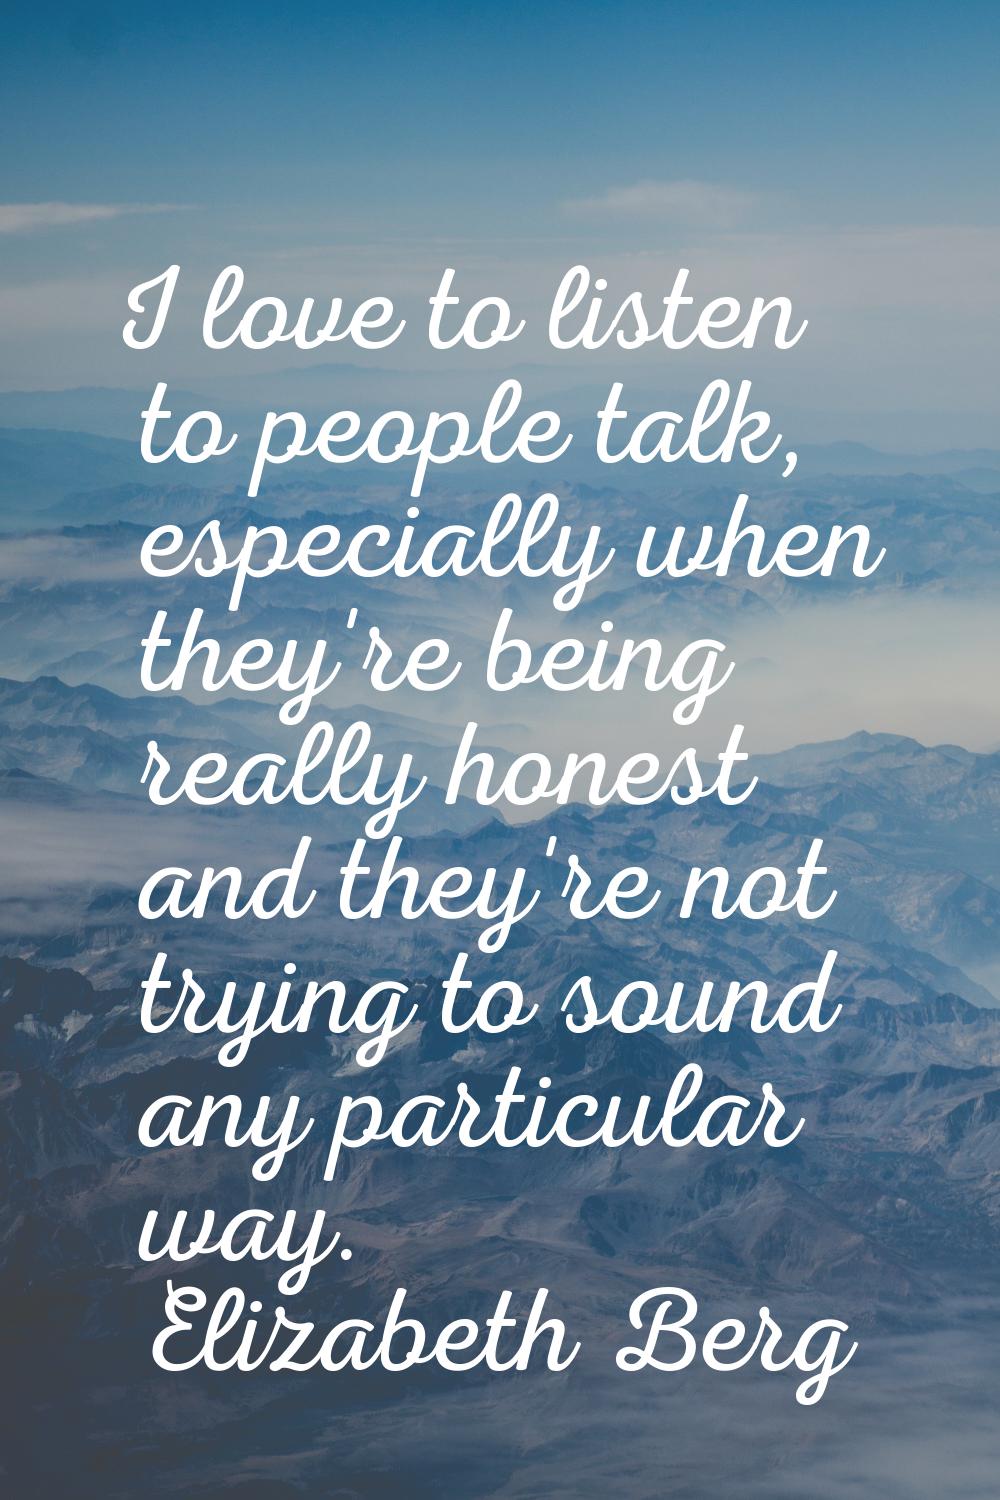 I love to listen to people talk, especially when they're being really honest and they're not trying